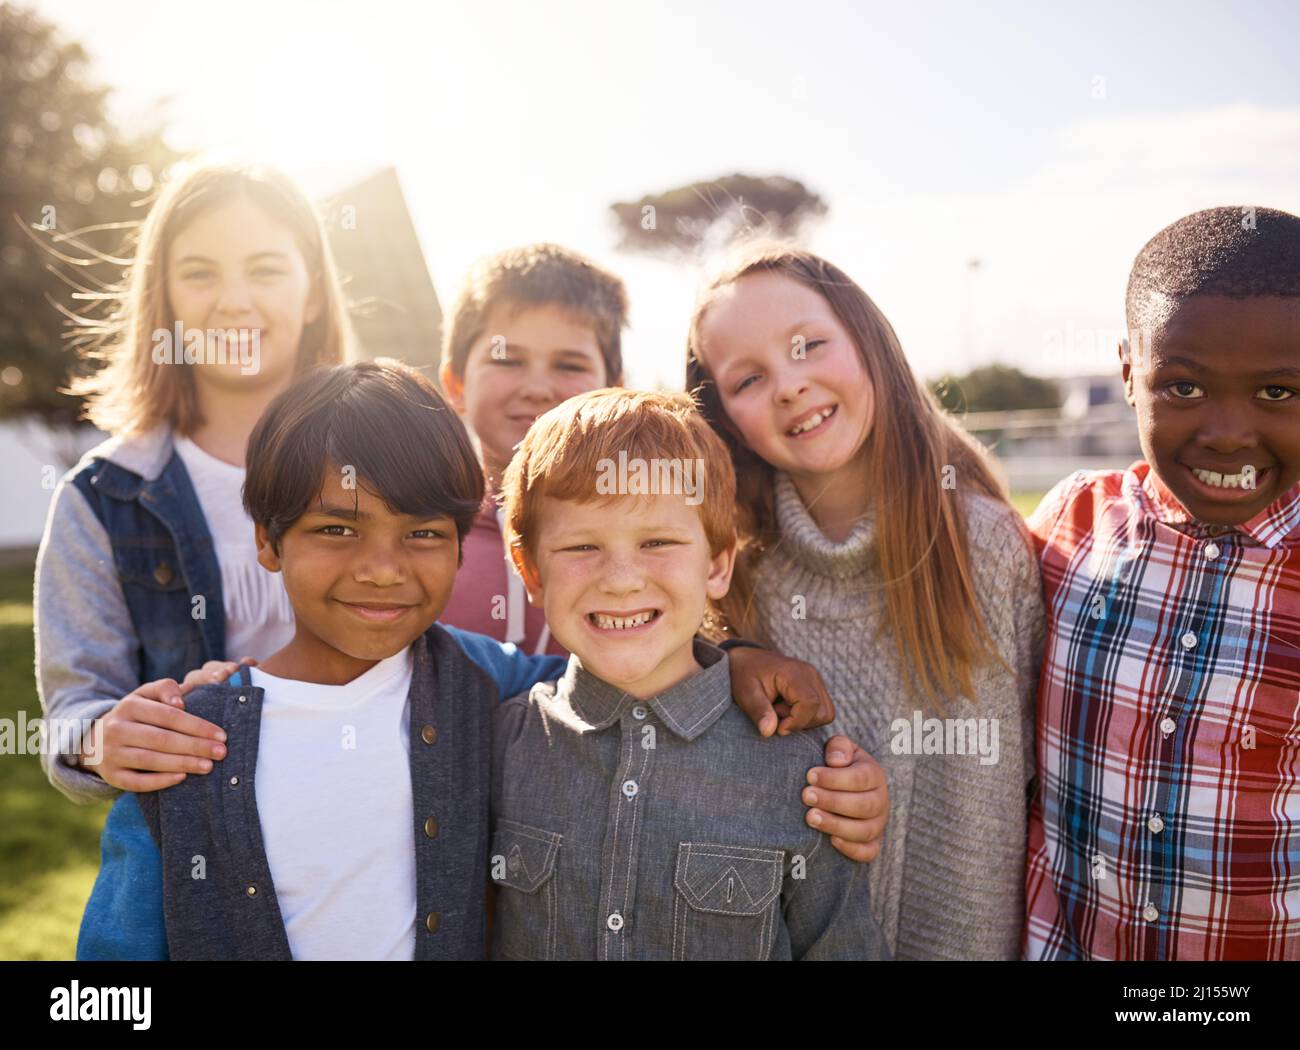 Theyre just being kids. Shot of young kids playing together outdoors. Stock Photo